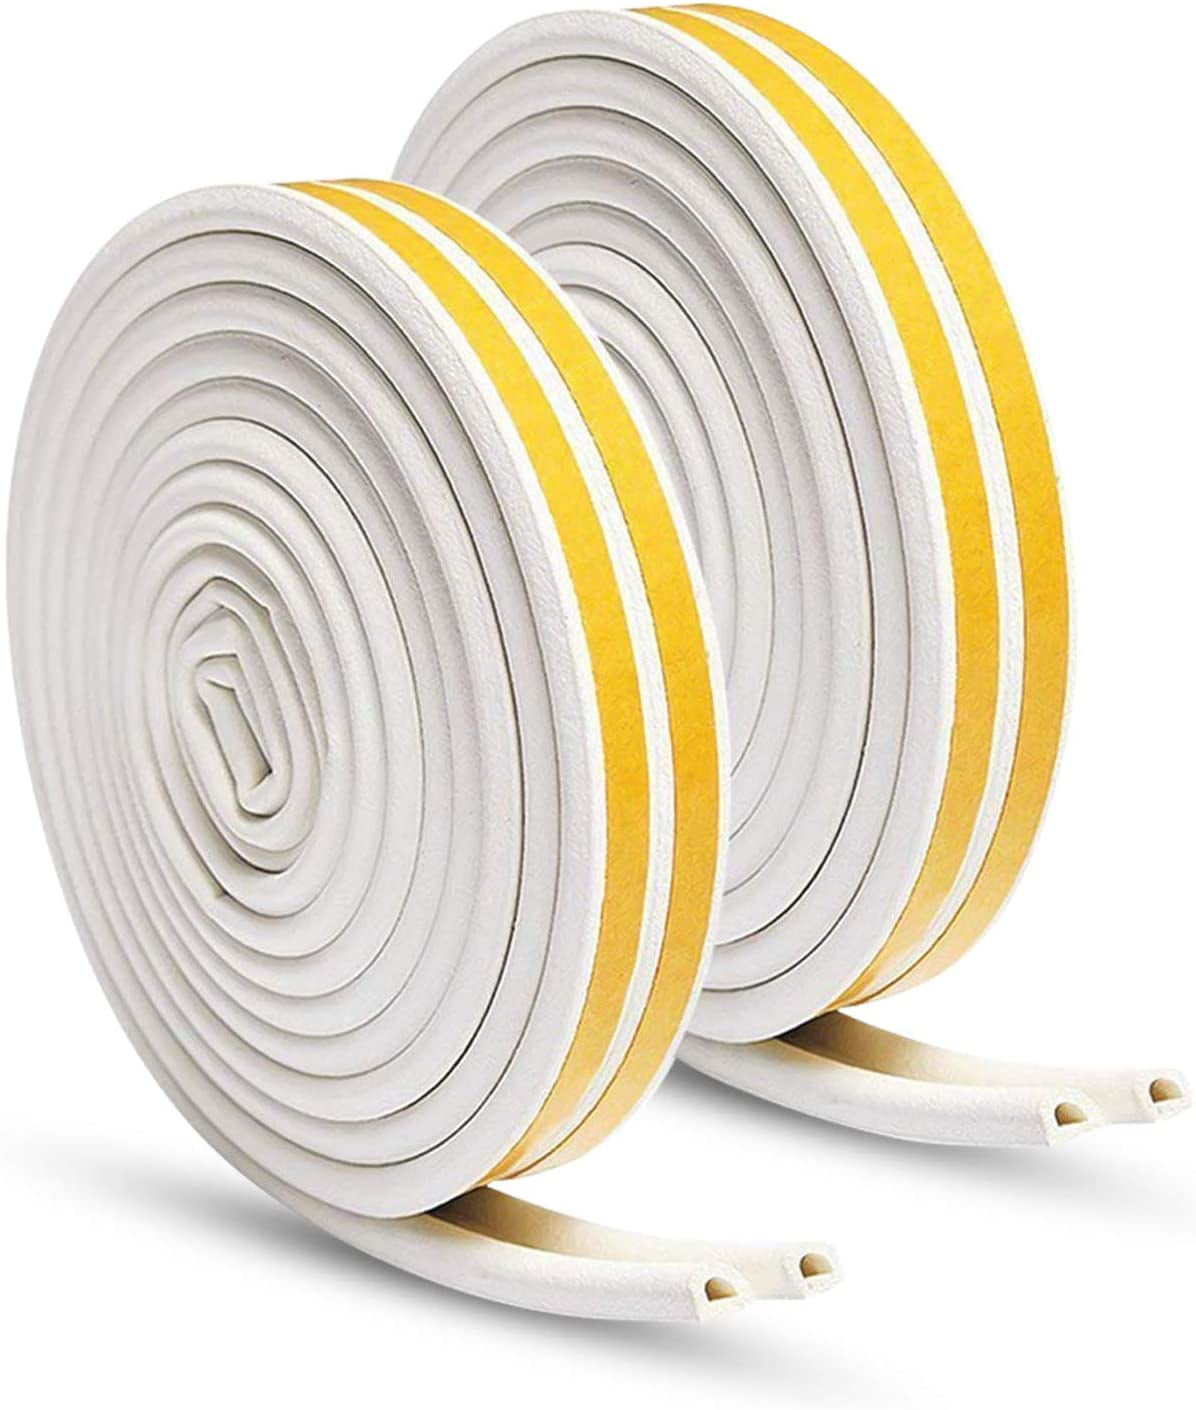 6M/19.6Ft Window Seal Strip, Weather Stripping, Silicone Door Seal